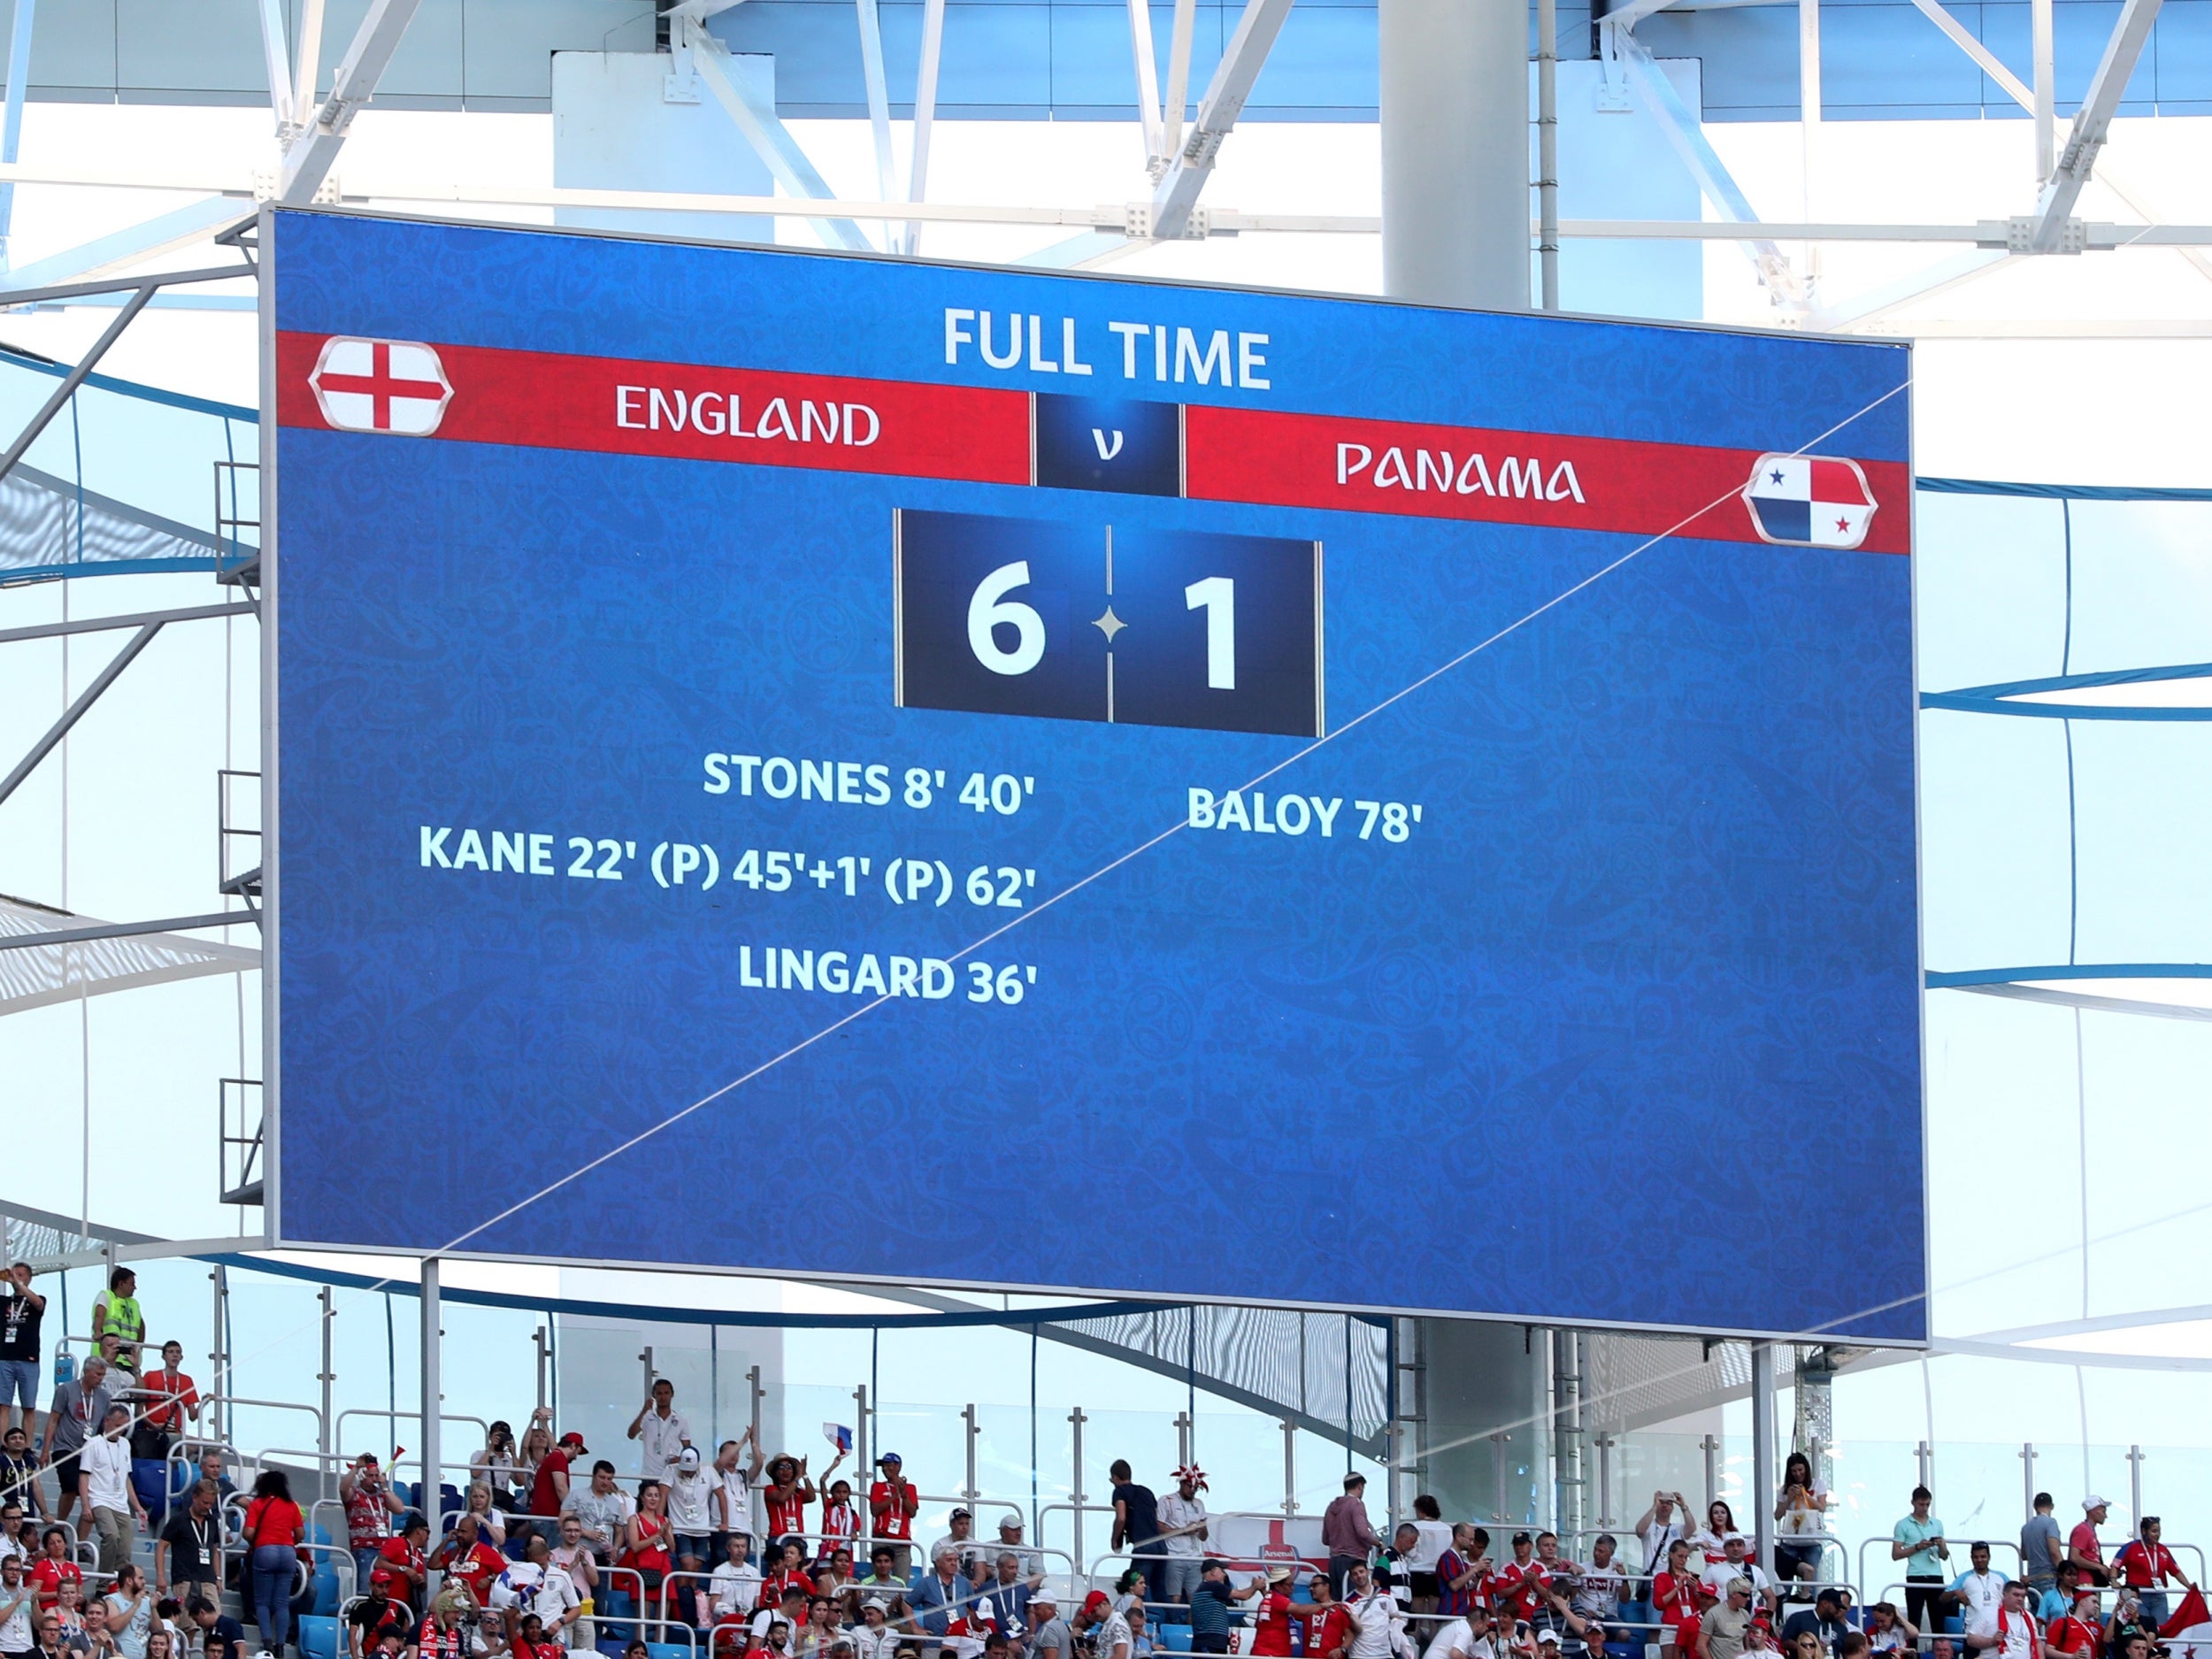 England's 6-1 win was record breaking